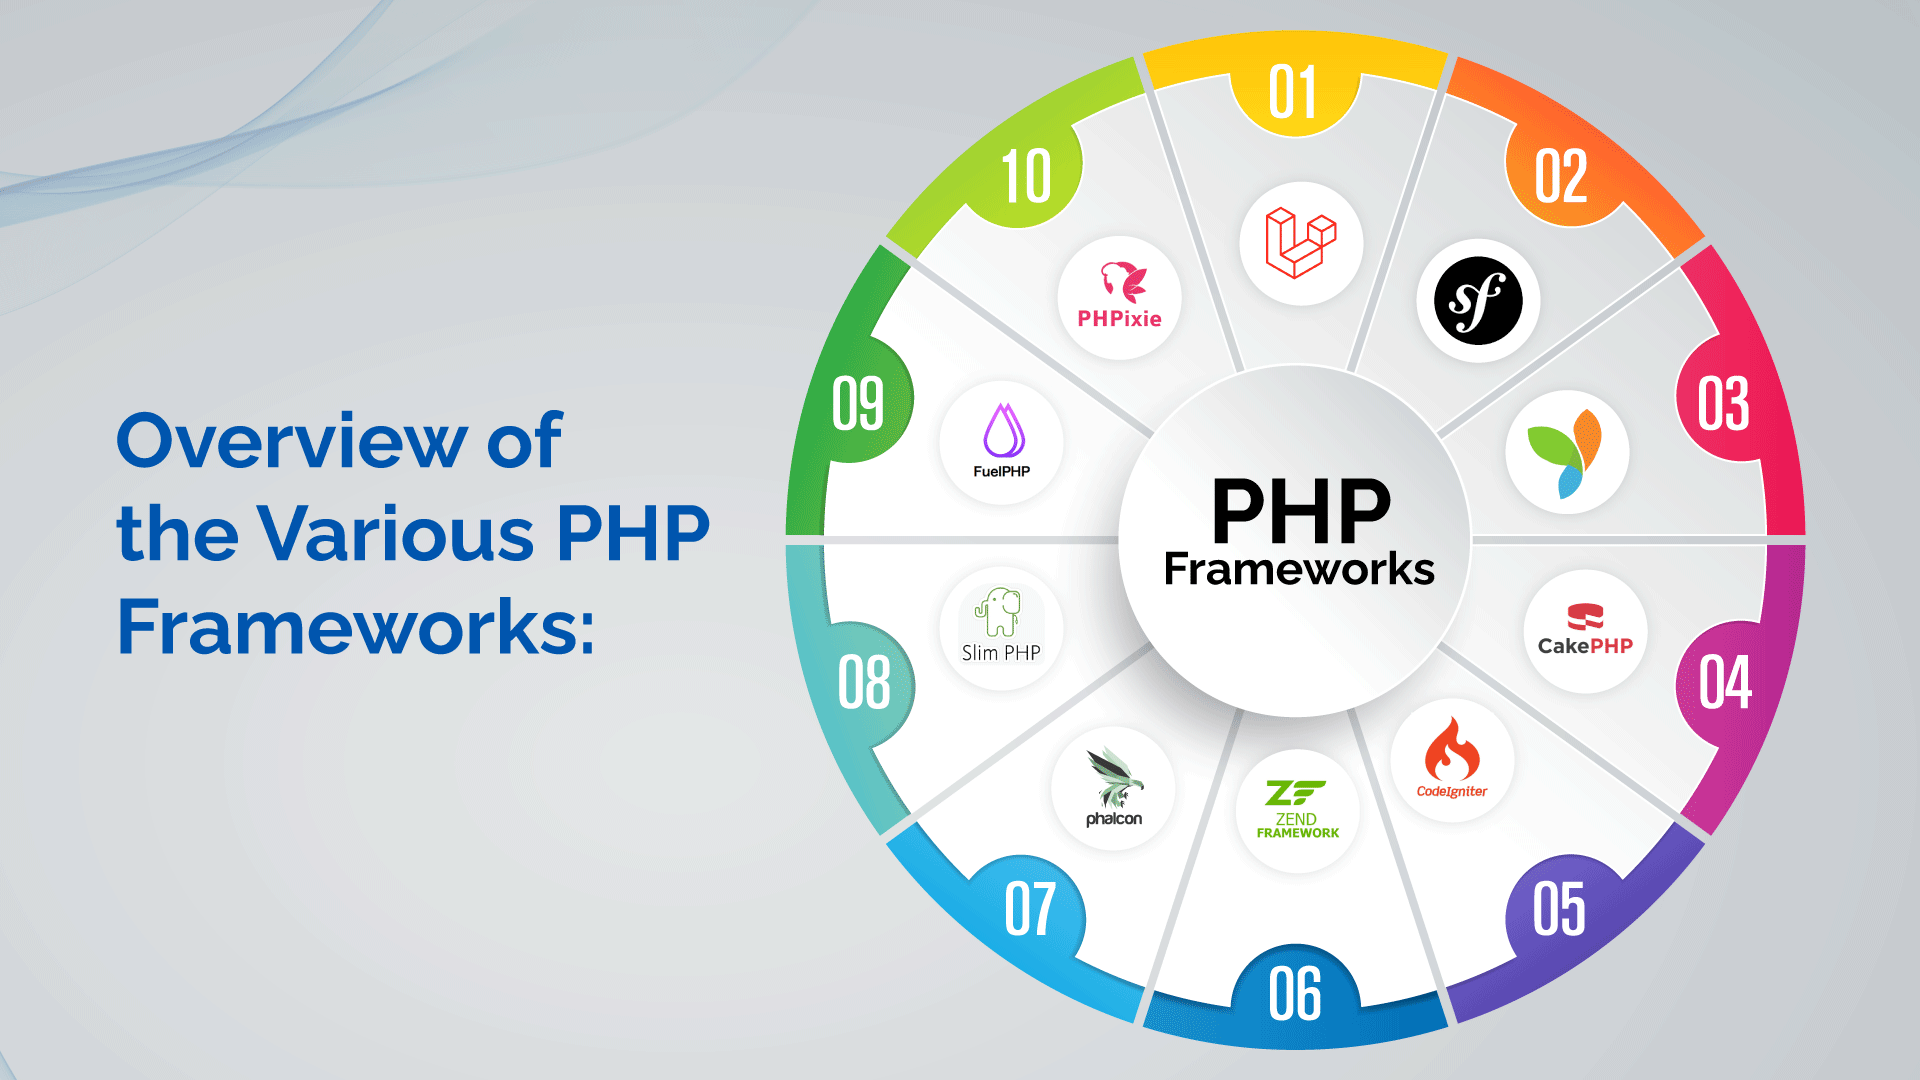 Overview of PHP Frameworks